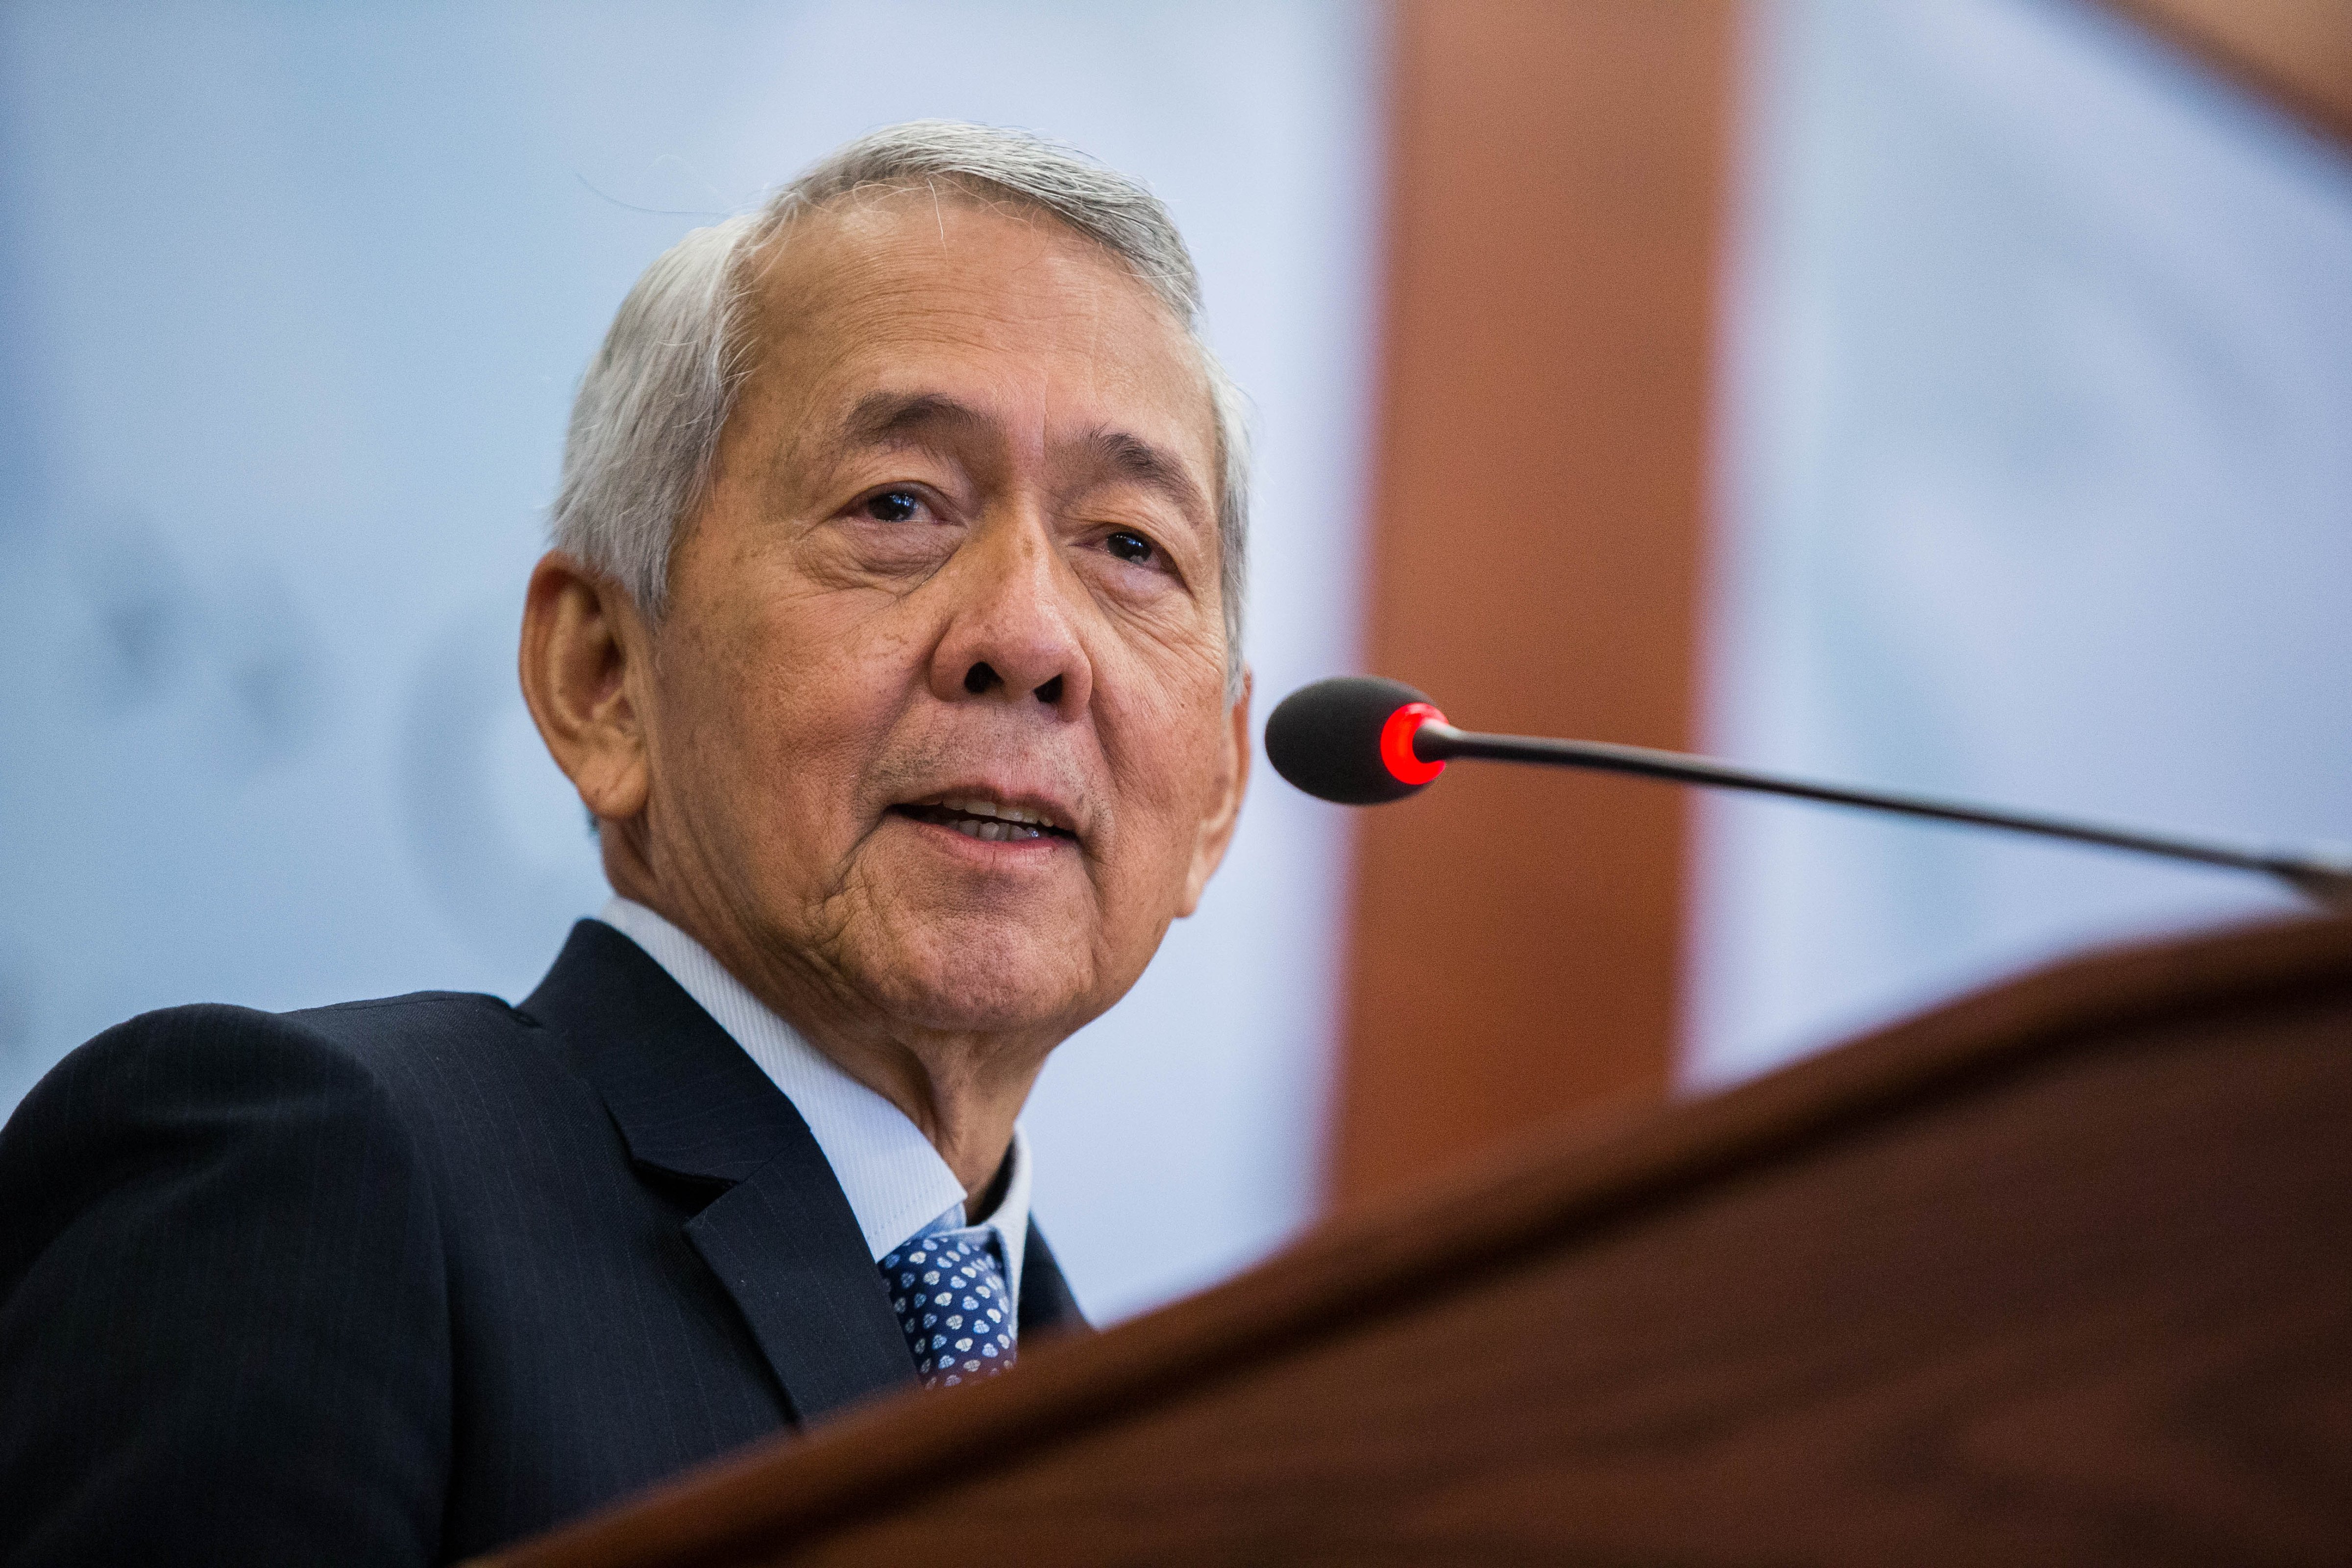 Secretary of Foreign Affairs of the Philippines Perfecto Yasay Jr. speaks during a forum at the Center for Strategic and International Studies headquarters in Washington, D.C.,  Sept. 15, 2016. (Zach Gibson—AFP/Getty Images)